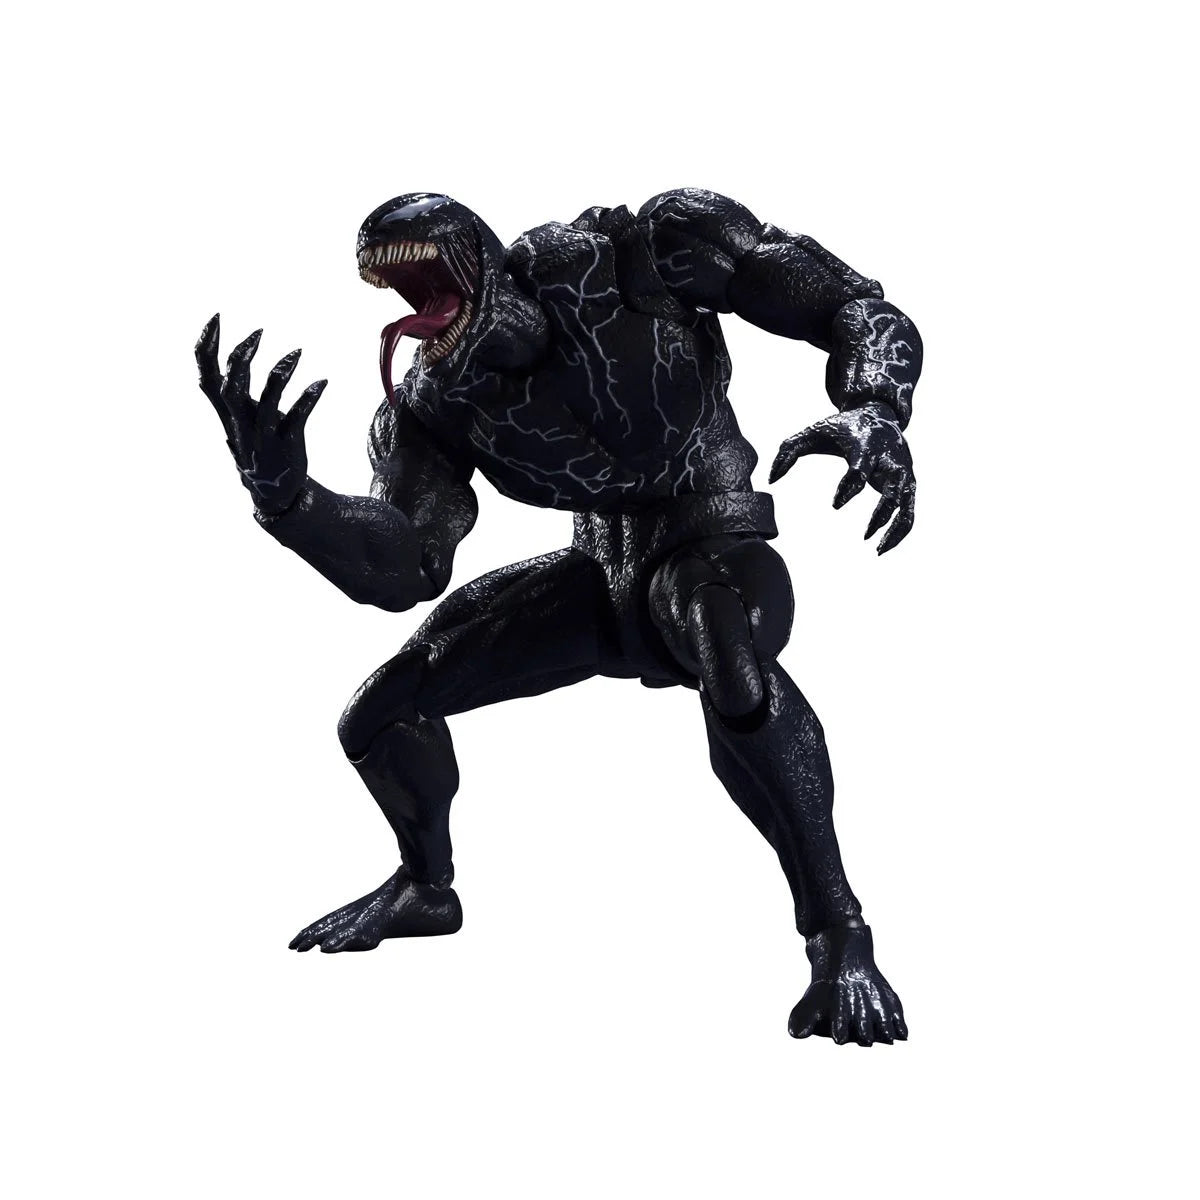 A detailed S.H.Figuarts Venom action figure standing 7.5 inches tall, with optional parts including three alternate head sculpts, two pairs of interchangeable hands, and two back tentacles. A bonus Venom symbiote head and pedestal are also displayed.